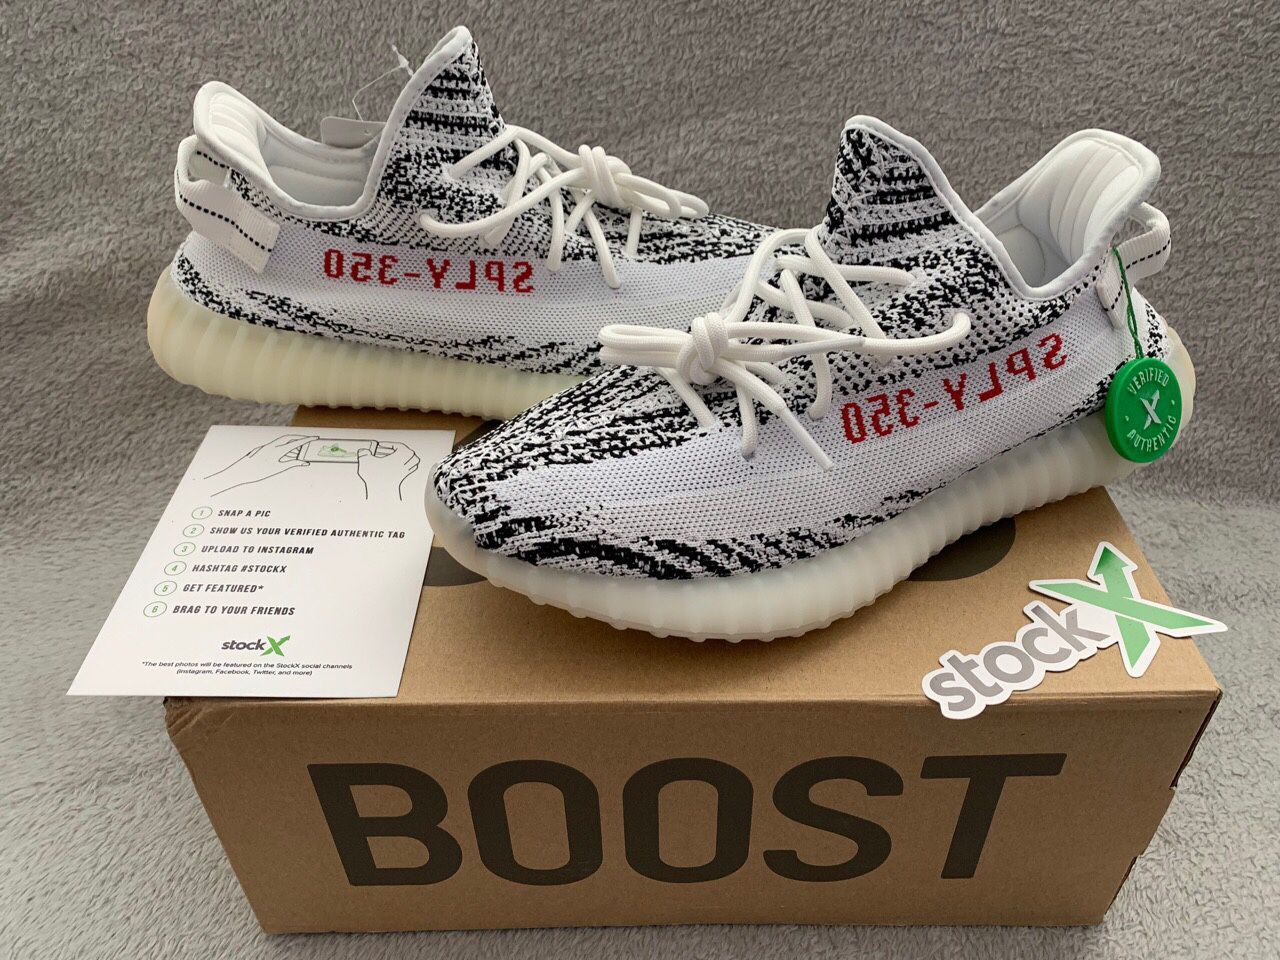 Adidas Yeezy Boost 350 V2 “Zebra” - Brand New - Never Used Men’s Shoes - Size 10 / 10.5 / 12